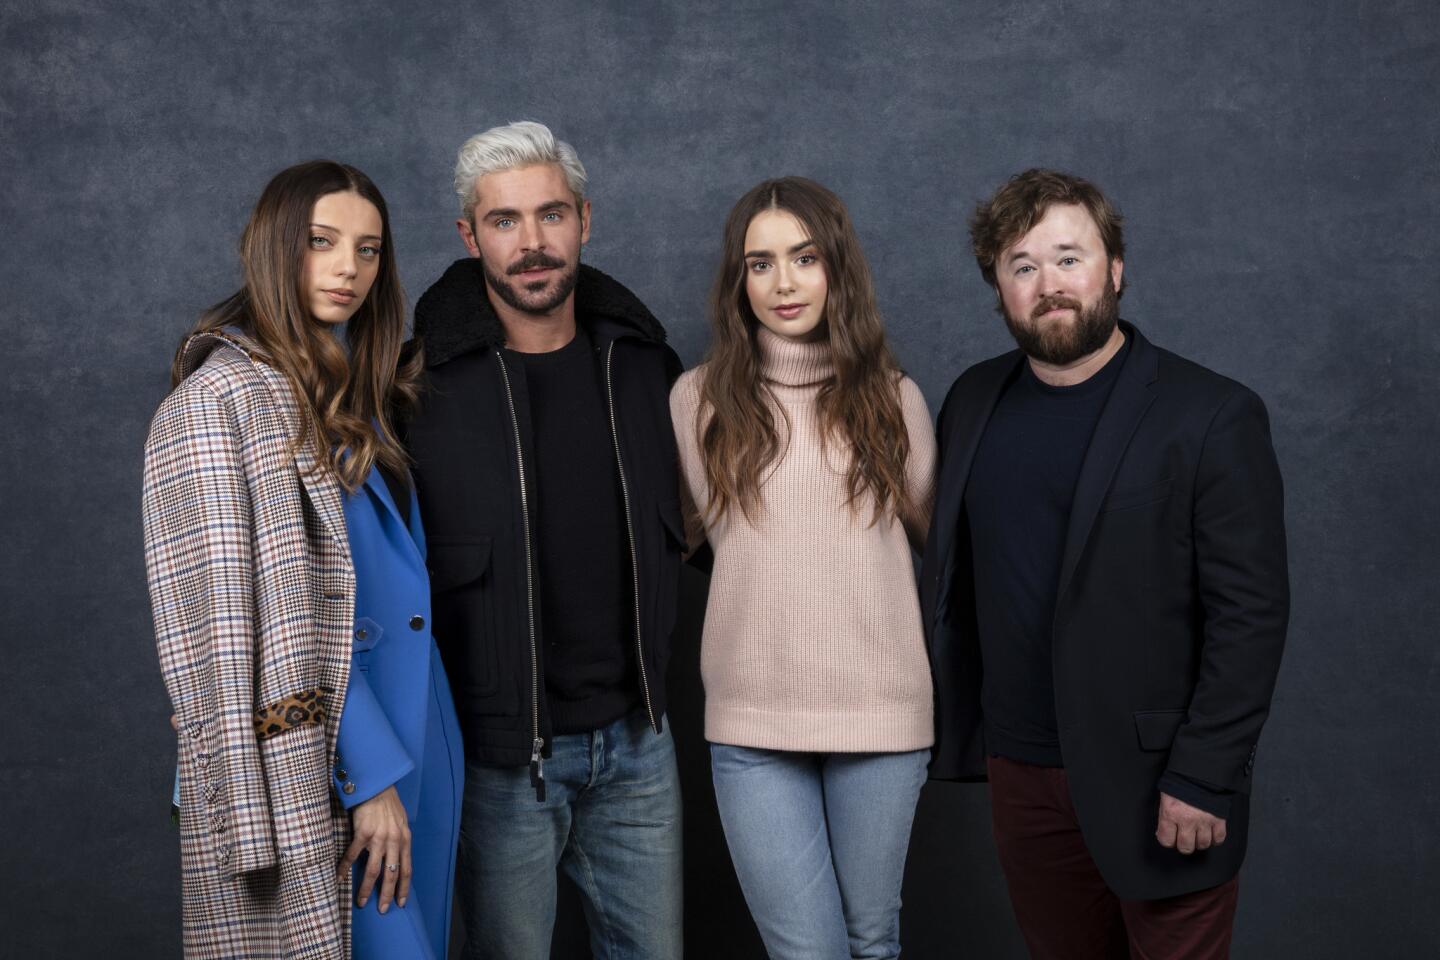 Actors Angela Sarafyan, Zac Efron, Lily Collins and Haley Joel Osment from the film "Extremely Wicked, Shockingly Evil and Vile."